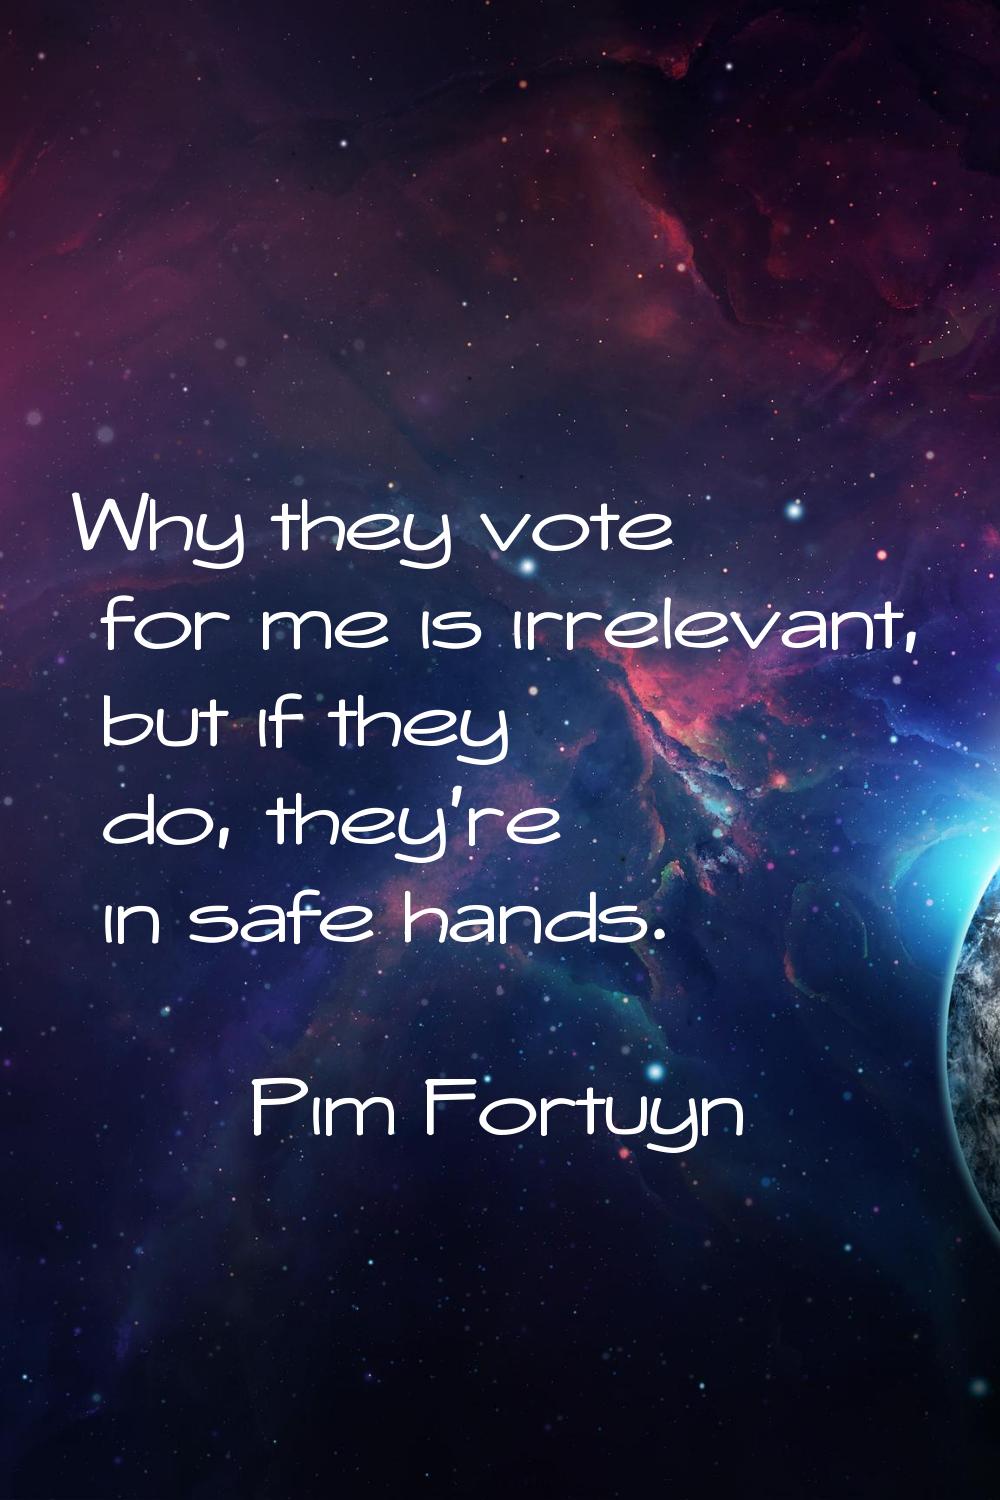 Why they vote for me is irrelevant, but if they do, they're in safe hands.